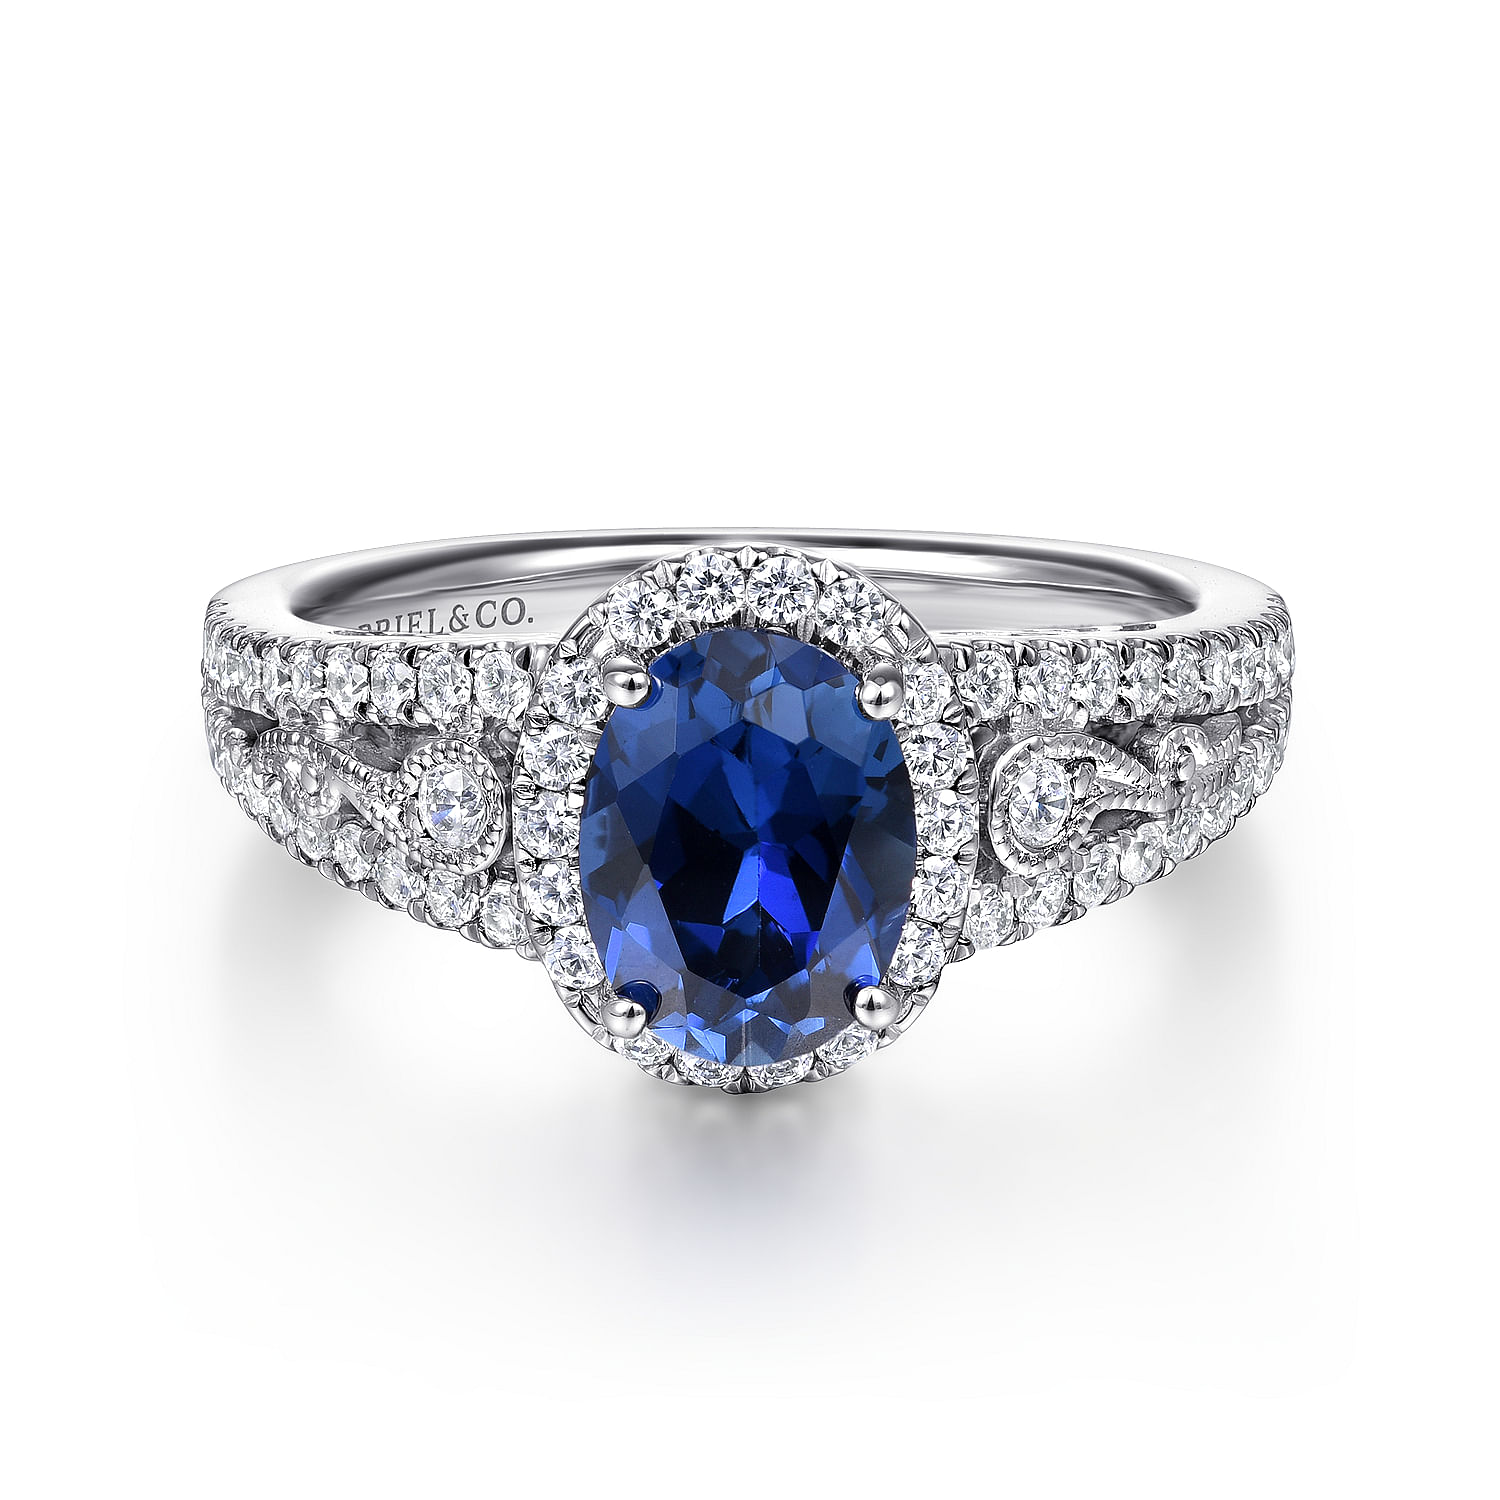 Nayana - 14K White Gold Oval Halo Sapphire and Diamond Engagement Ring